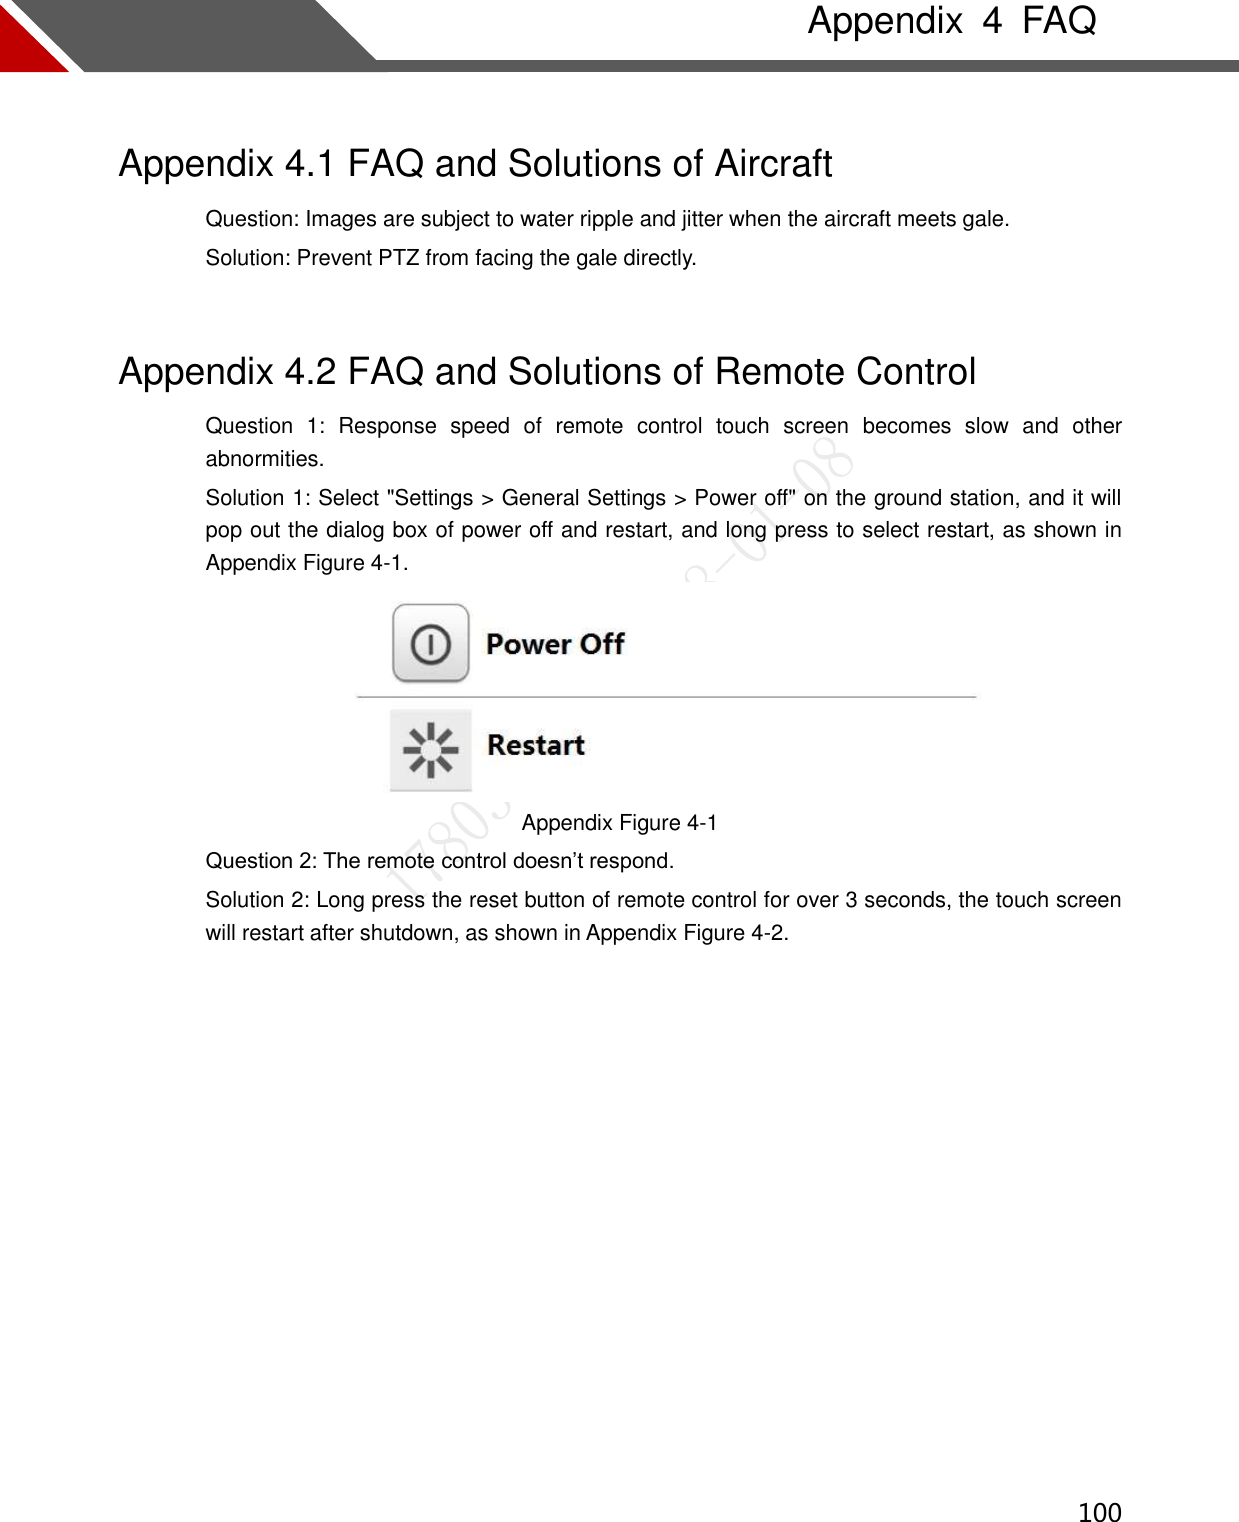  100   Appendix  4  FAQ Appendix 4.1 FAQ and Solutions of Aircraft Question: Images are subject to water ripple and jitter when the aircraft meets gale.   Solution: Prevent PTZ from facing the gale directly.   Appendix 4.2 FAQ and Solutions of Remote Control Question  1:  Response  speed  of  remote  control  touch  screen  becomes  slow  and  other abnormities. Solution 1: Select &quot;Settings &gt; General Settings &gt; Power off&quot; on the ground station, and it will pop out the dialog box of power off and restart, and long press to select restart, as shown in Appendix Figure 4-1.  Appendix Figure 4-1 Question 2: The remote control doesn’t respond. Solution 2: Long press the reset button of remote control for over 3 seconds, the touch screen will restart after shutdown, as shown in Appendix Figure 4-2.   